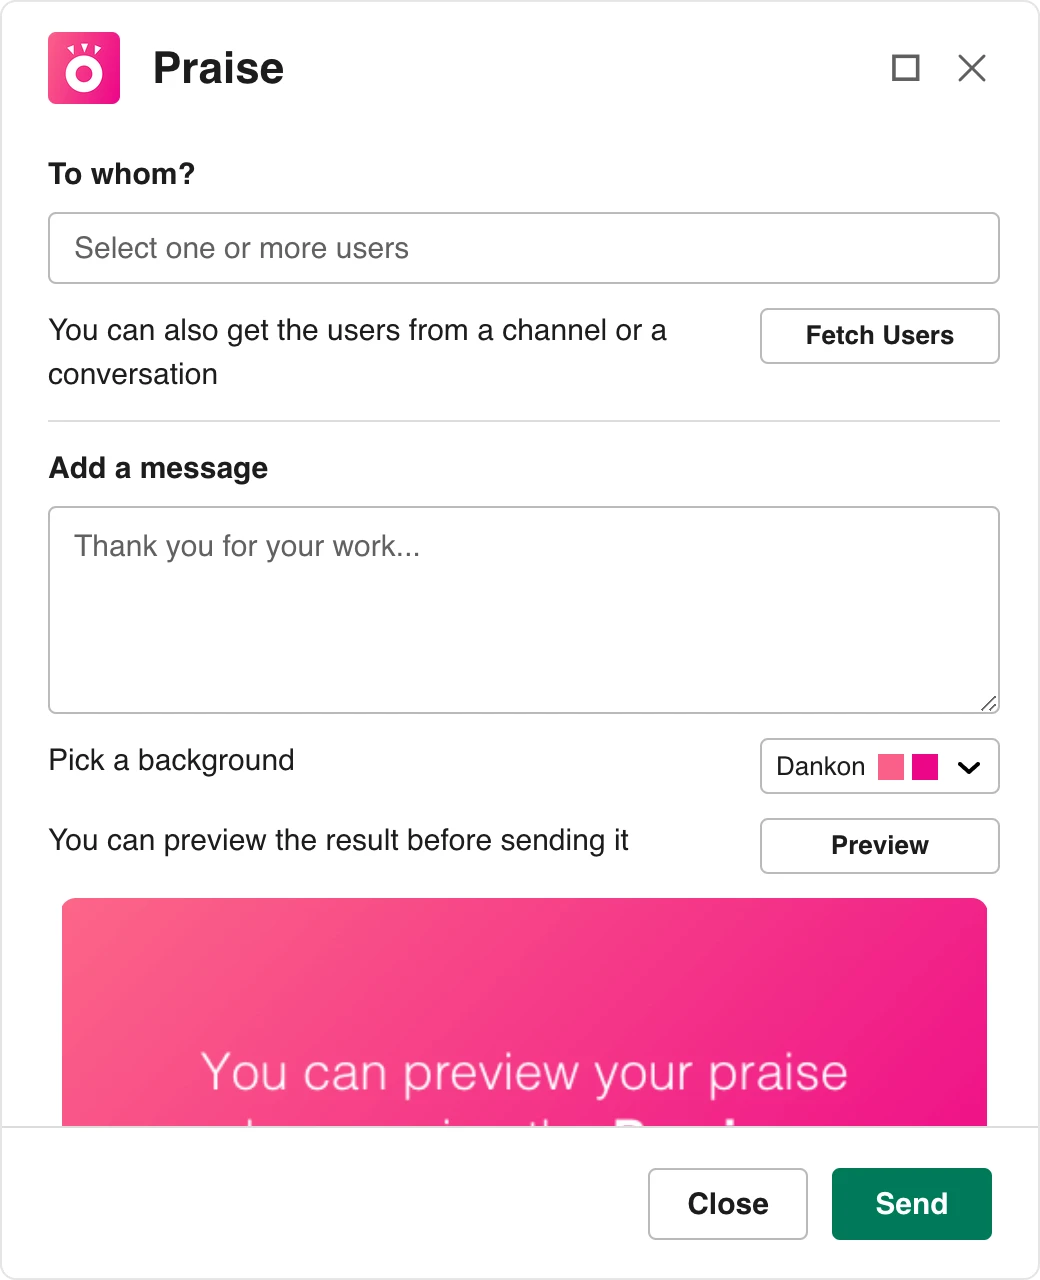 The form to send a praise directly on Slack.